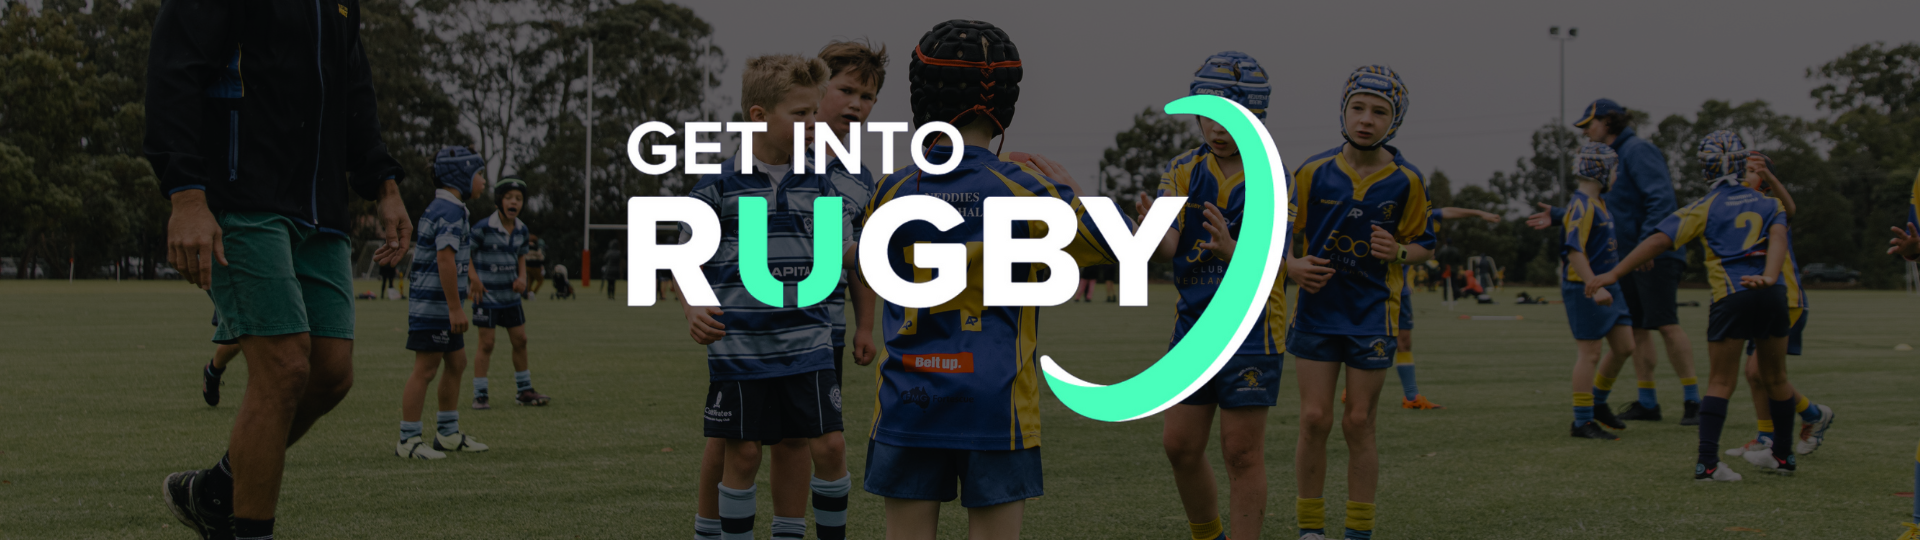 Get Into Rugby Banner RUGBYWA